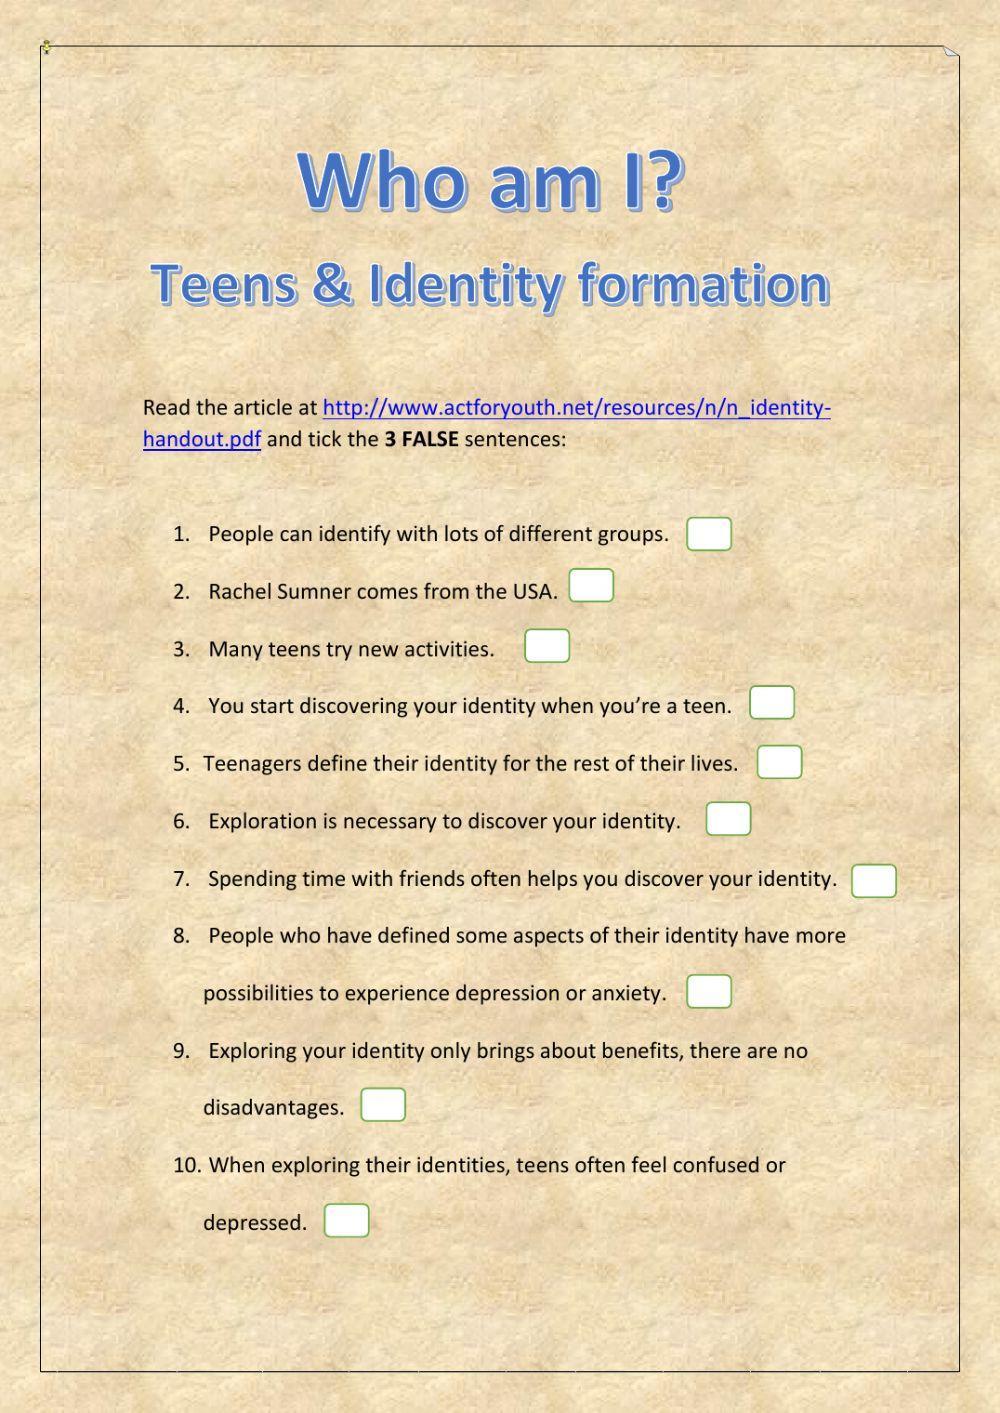 Teens and Identity Formation